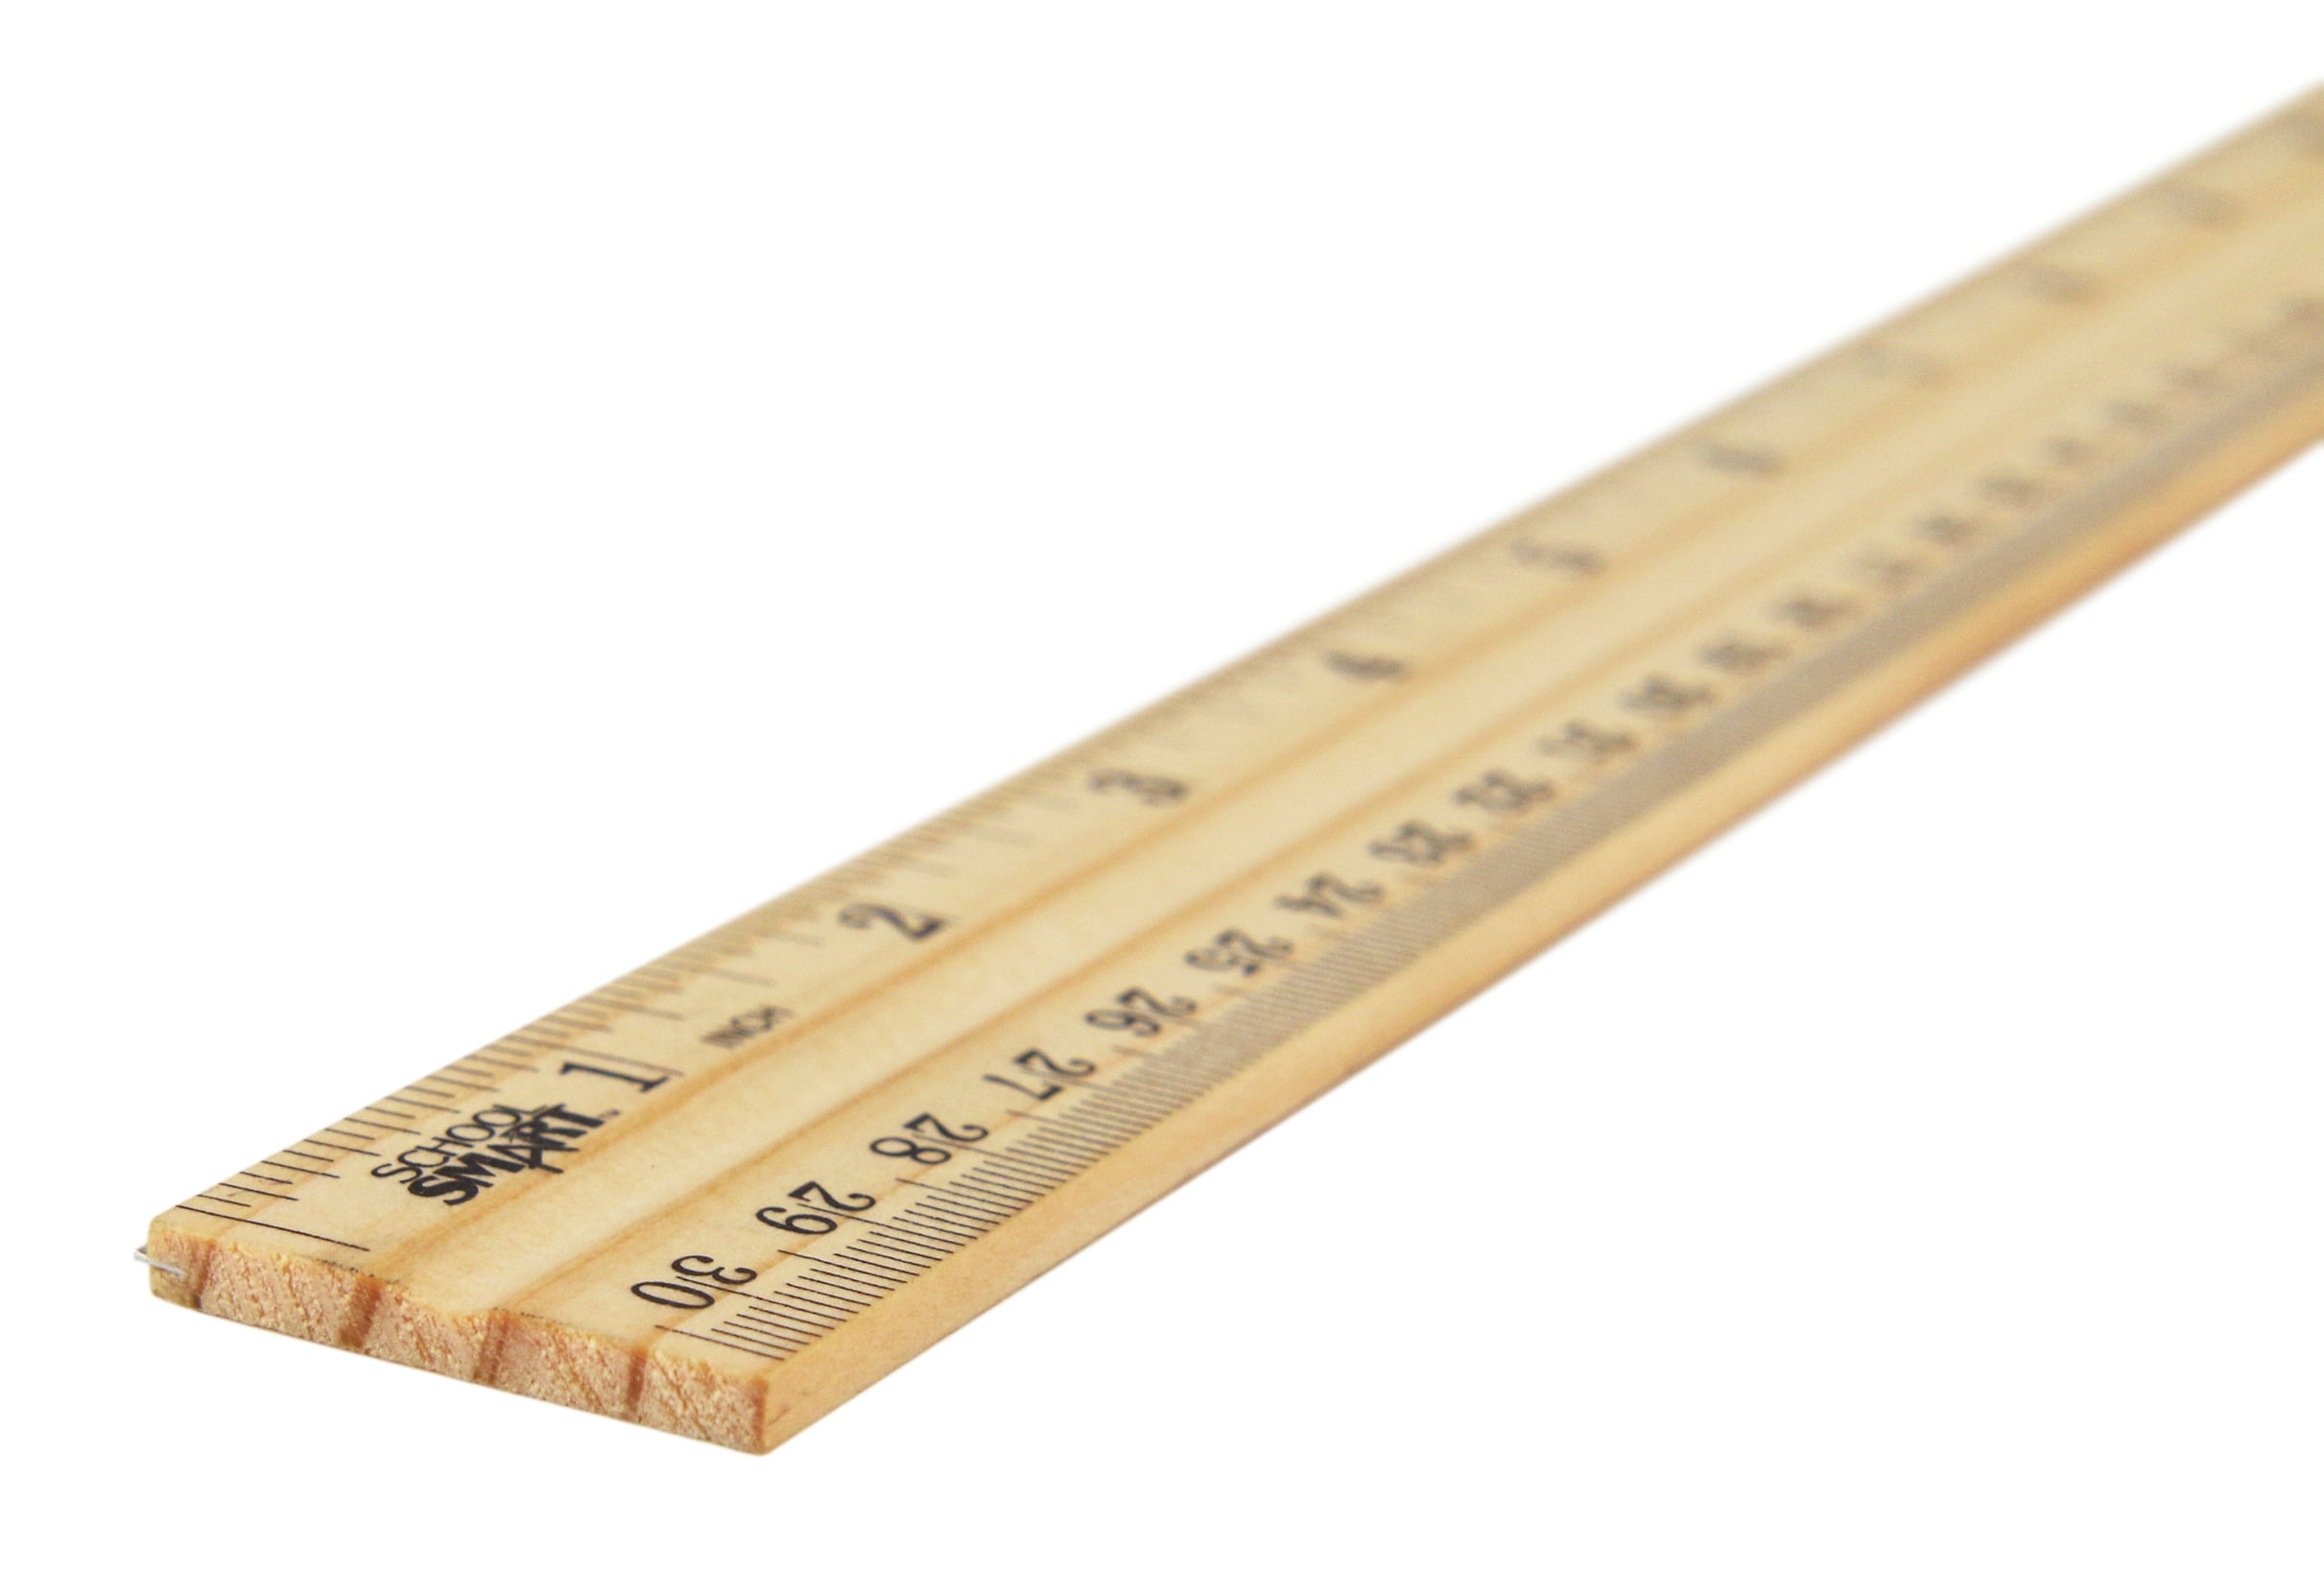 Double Bevel/Metal Edge/Varnished Wood Ruler, 12 Inches, Box of 36